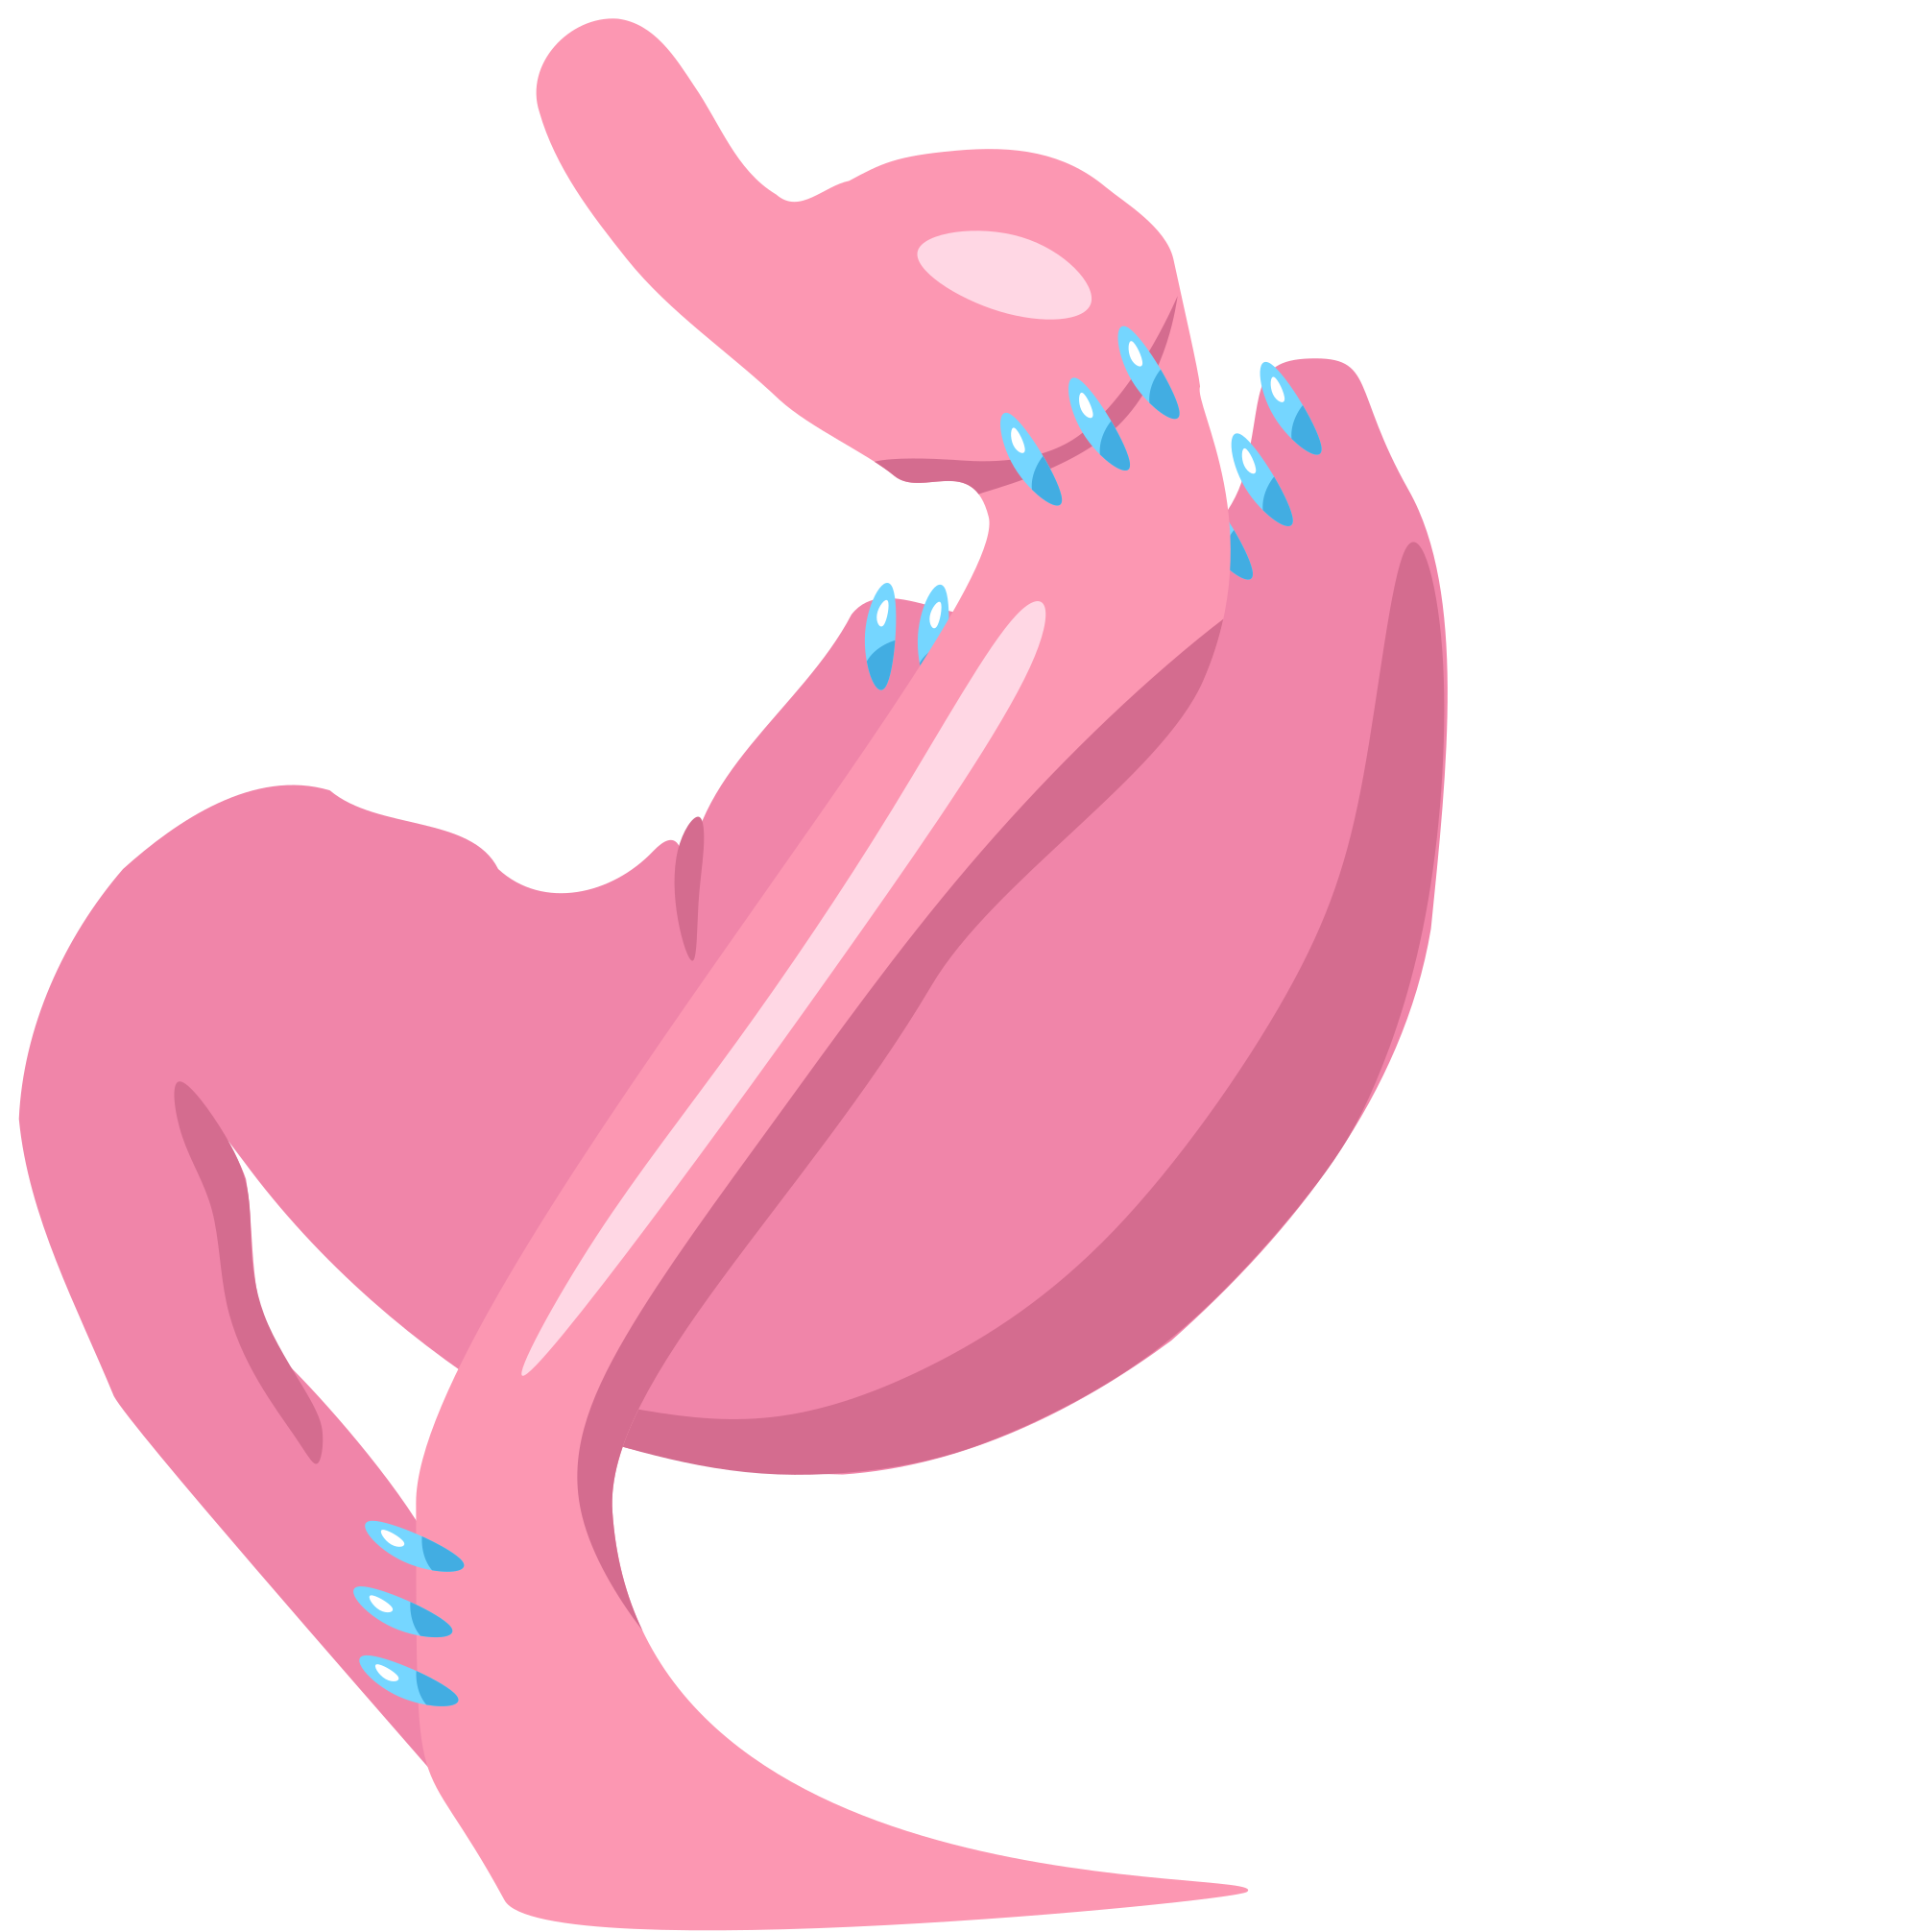 Danger clipart contraindication. Gastric bypass surgery wikipedia